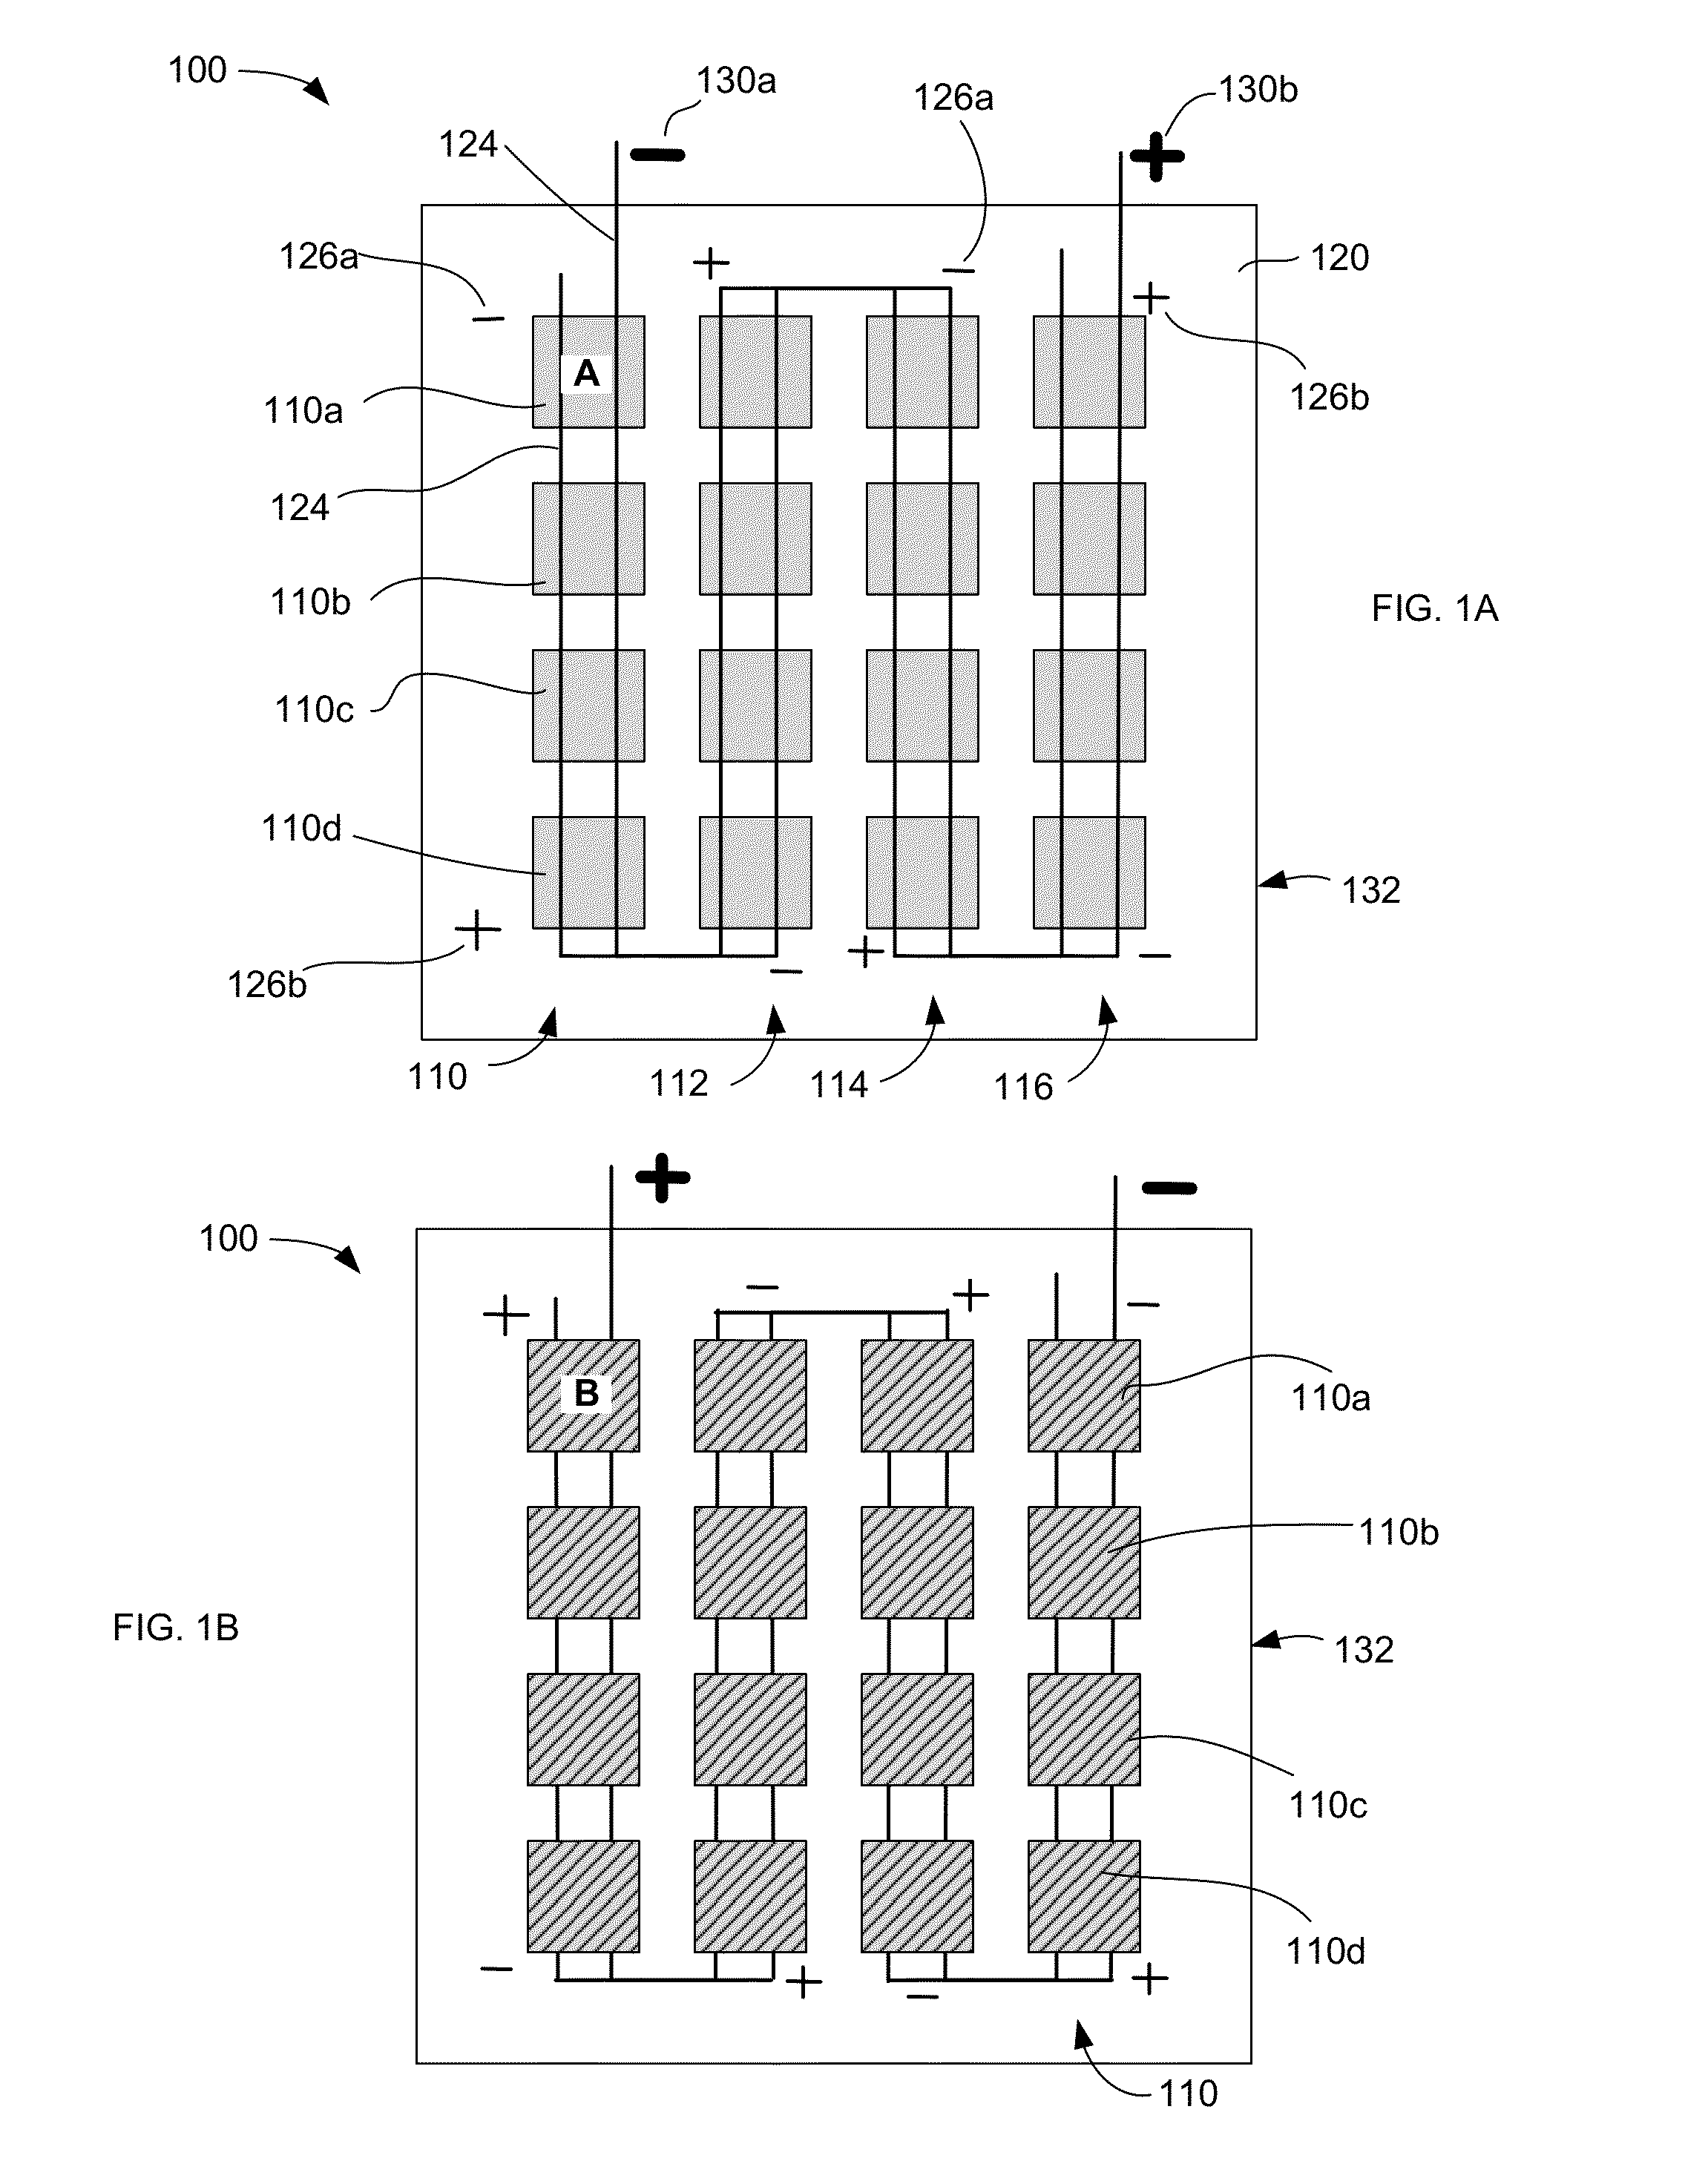 Bussing for pv-module with unequal-efficiency bi-facial pv-cells